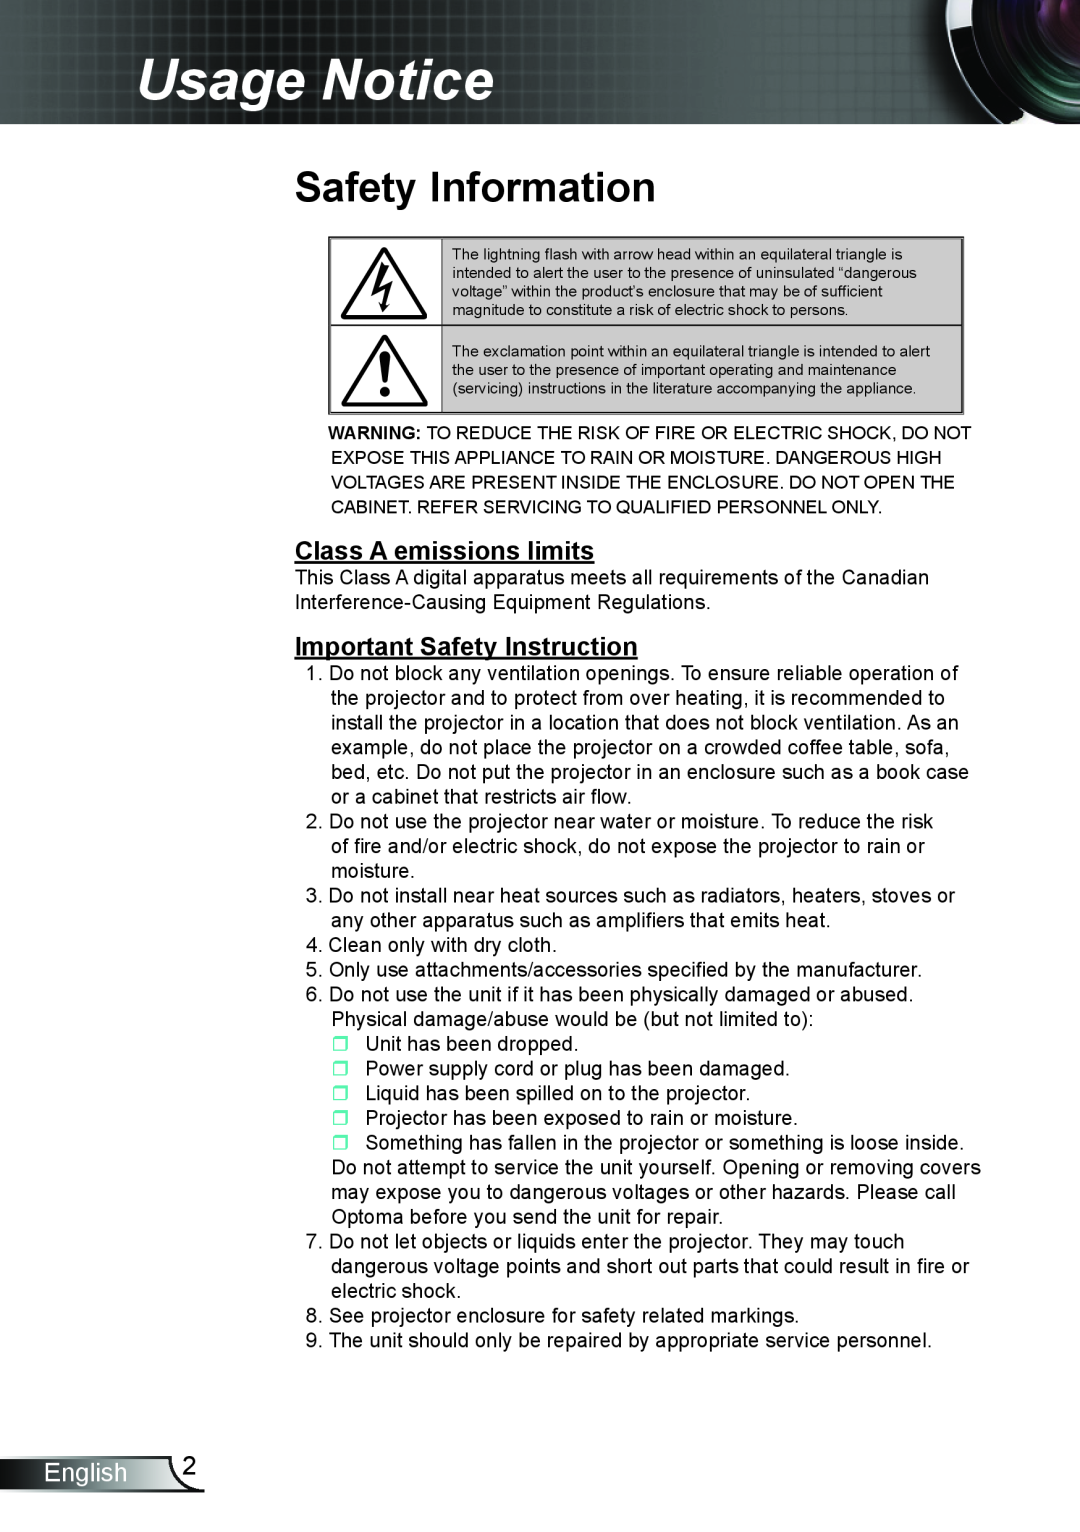 Optoma Technology TH7500NL manual Usage Notice, Safety Information, Class A emissions limits, Important Safety Instruction 